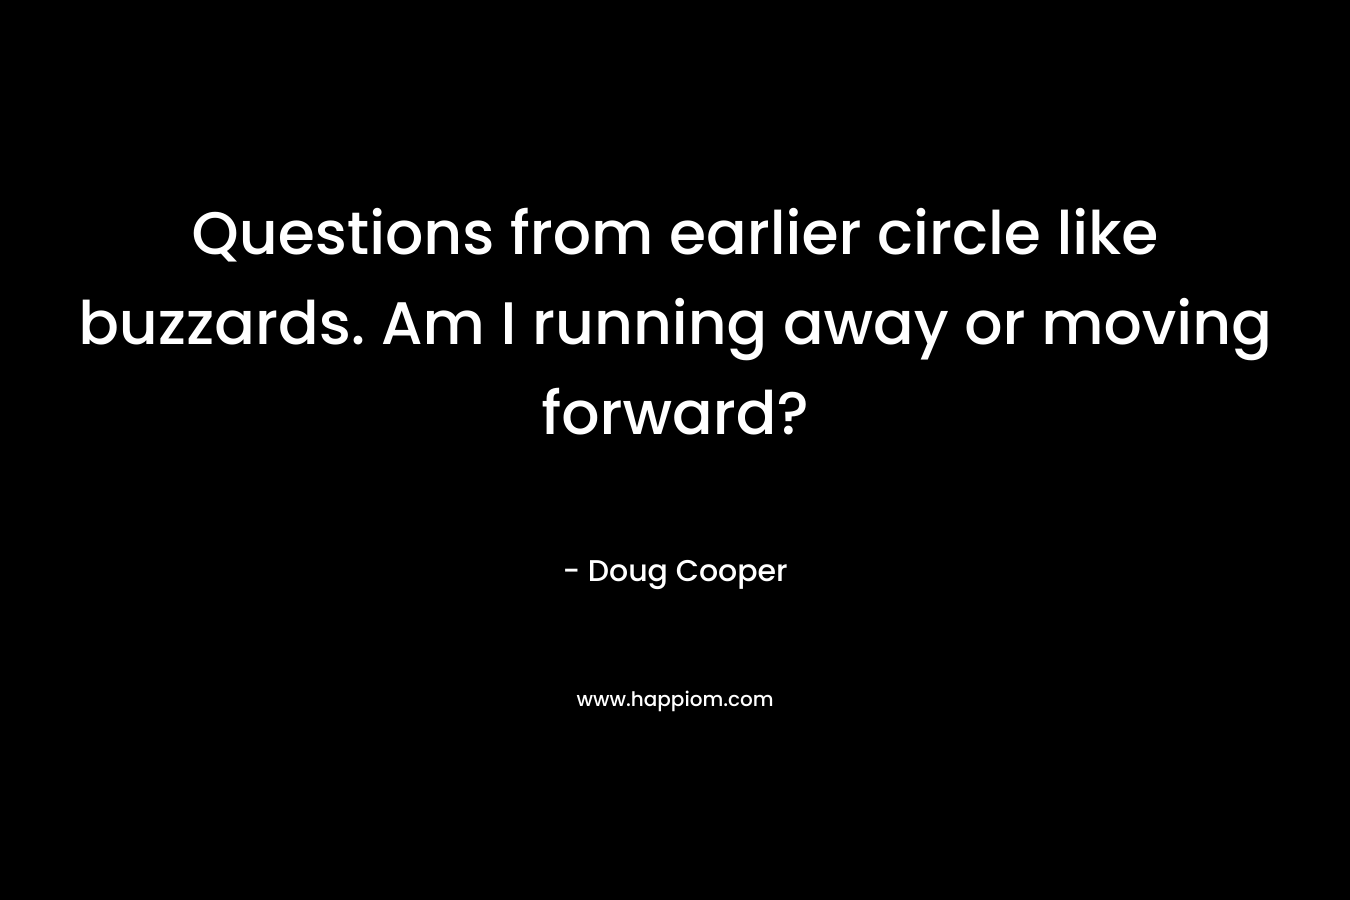 Questions from earlier circle like buzzards. Am I running away or moving forward?